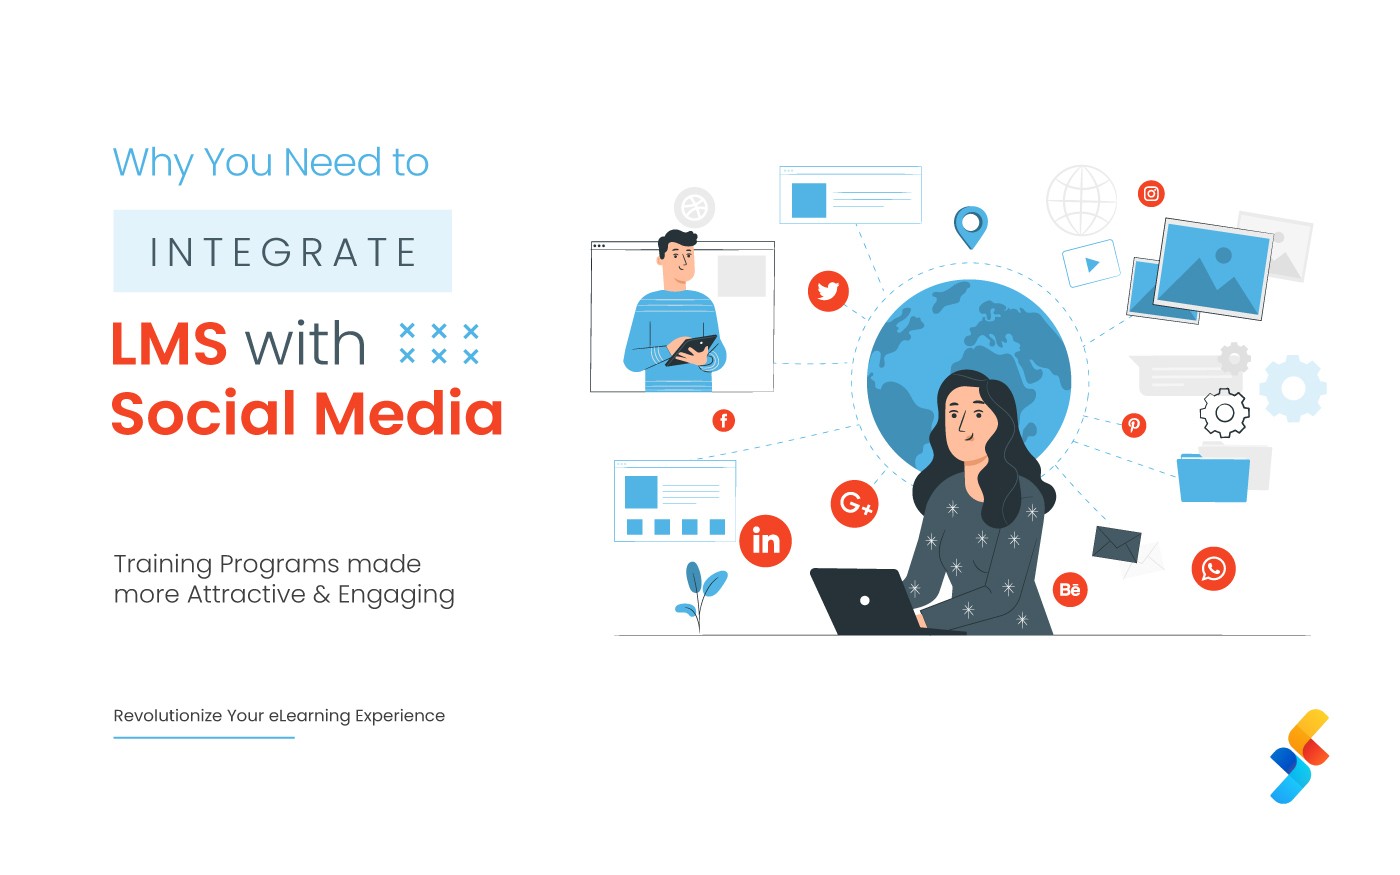 Why You Need to Integrate LMS with Social Media